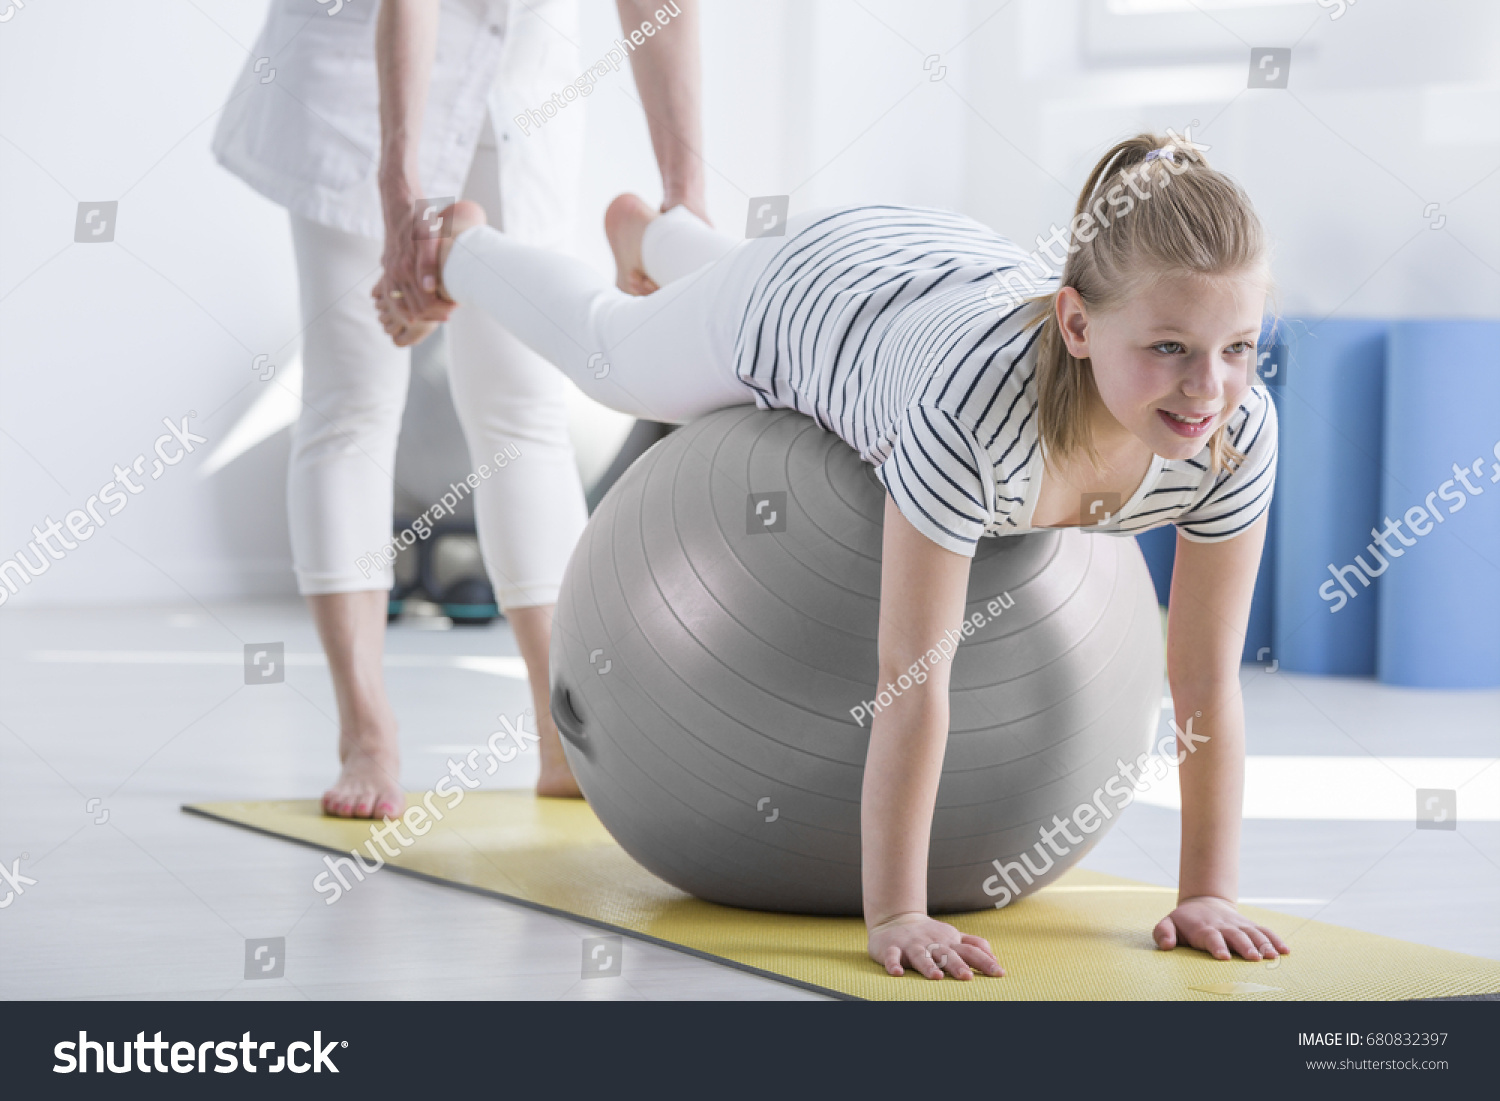 Smiling young girl lying on ball during pediatric occupational therapy #680832397